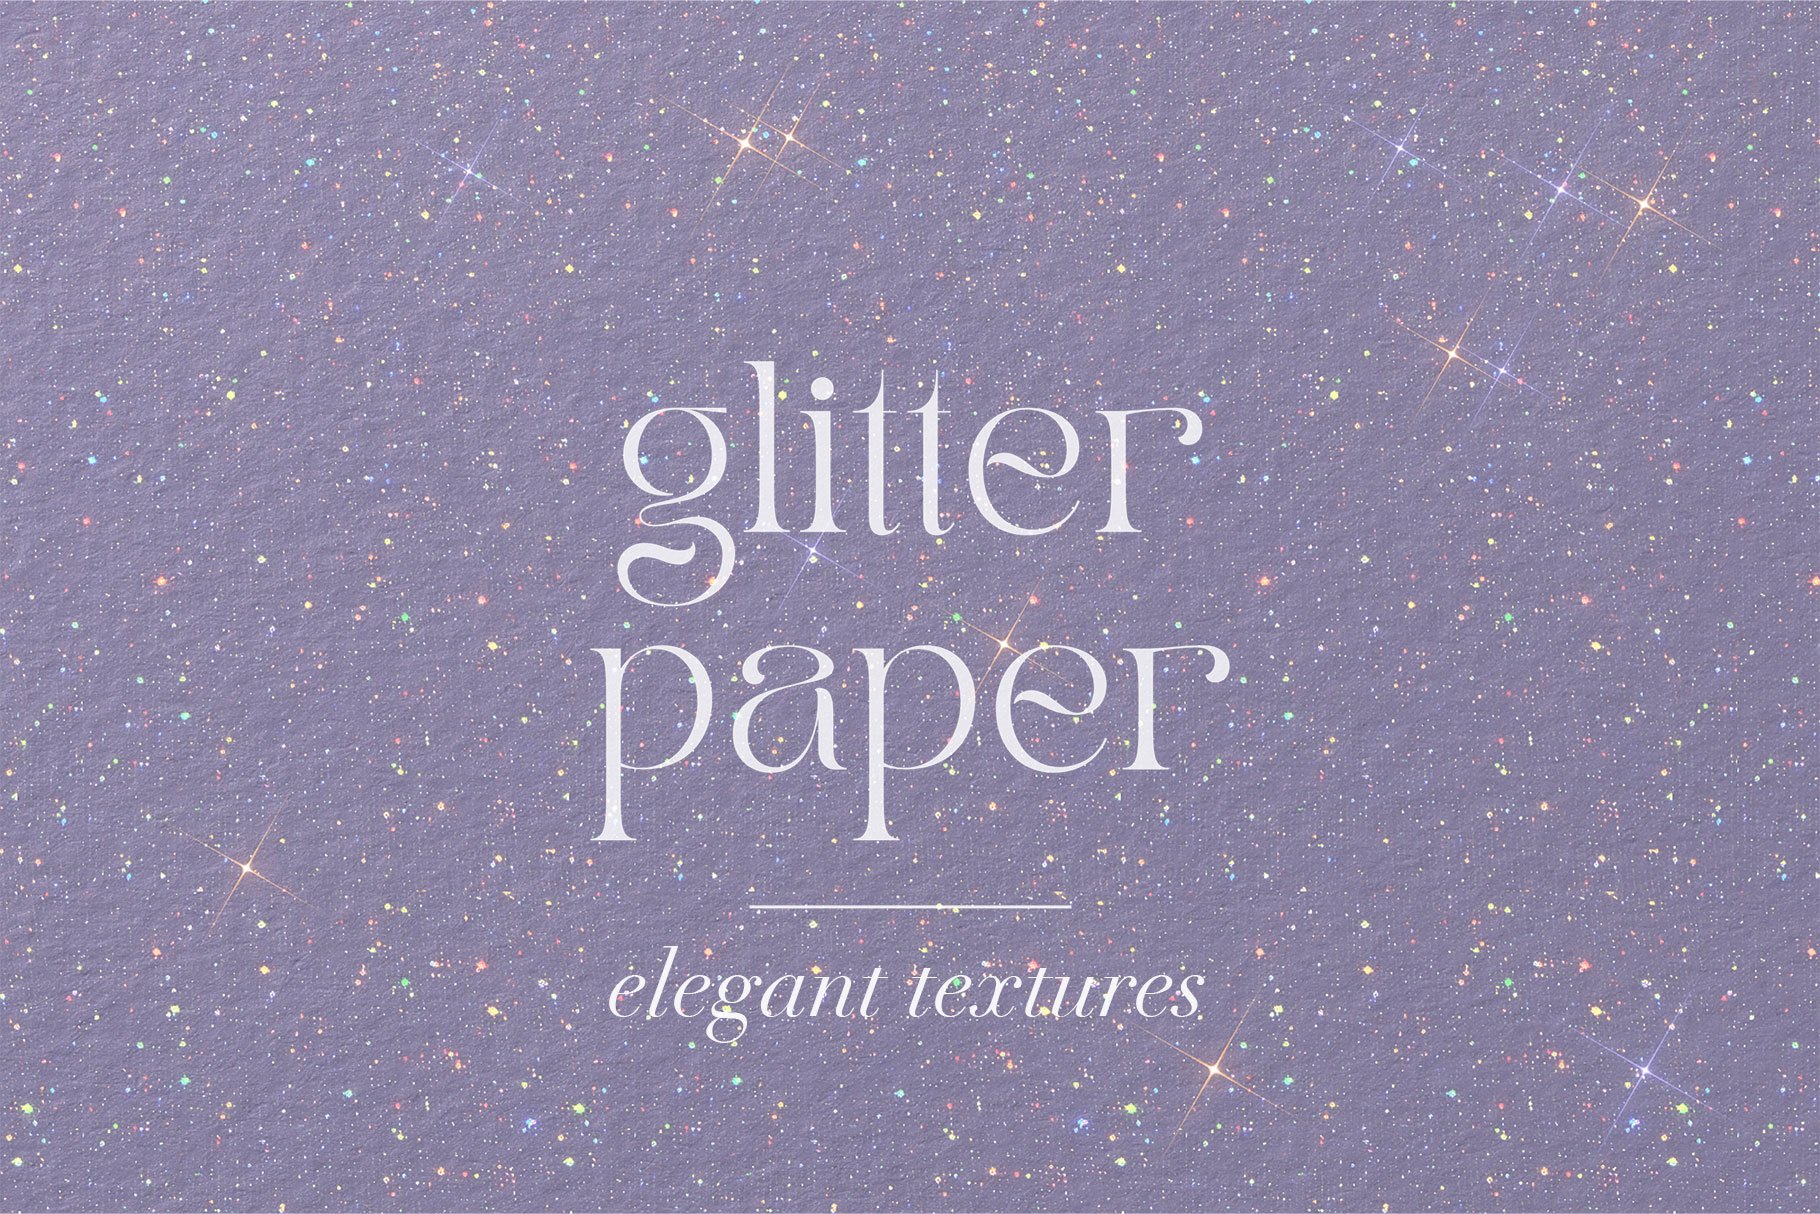 Glitter Paper + Textures cover image.